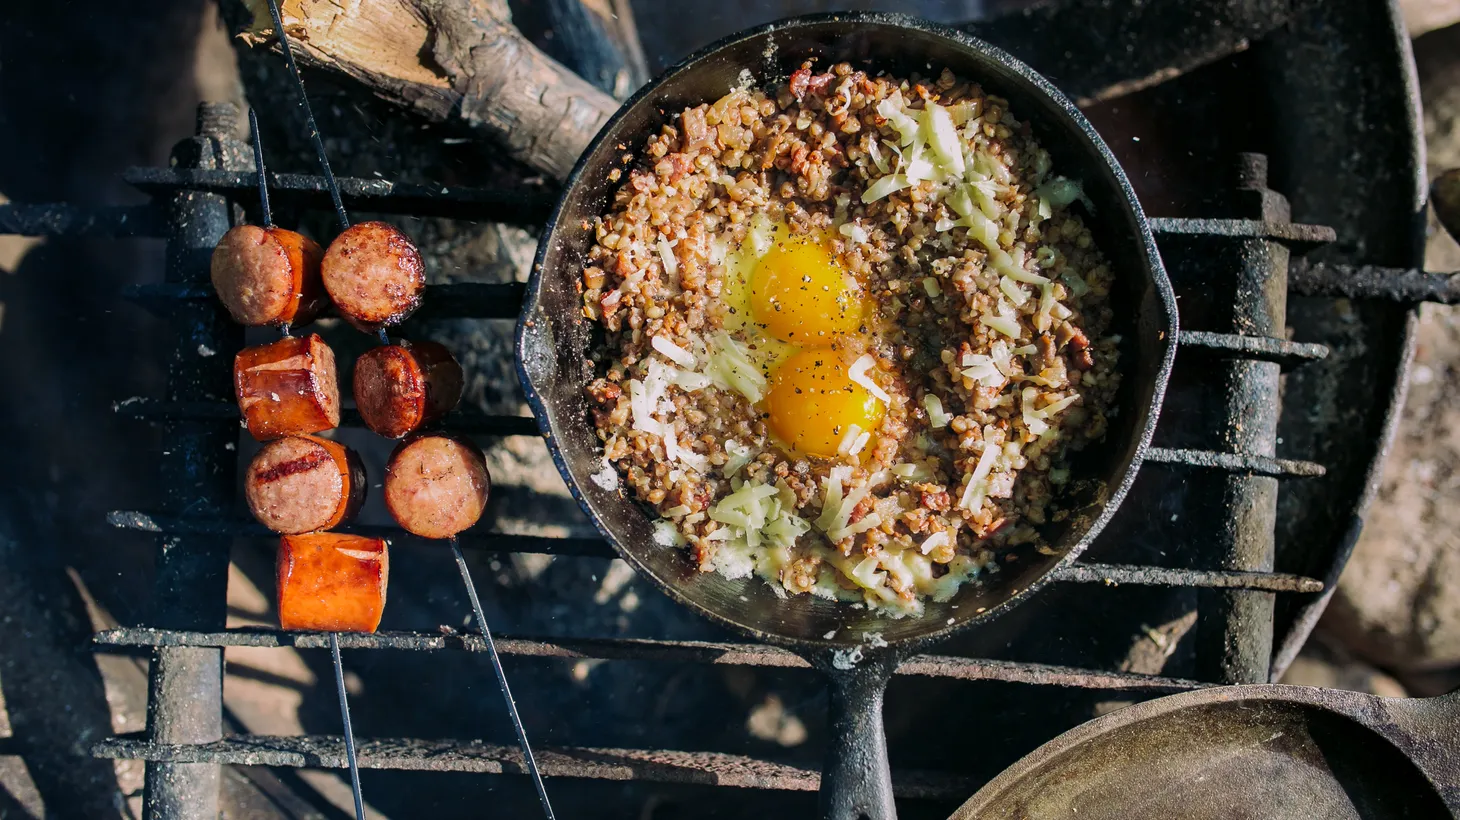 https://www.kcrw.com/culture/shows/good-food/camping-cooking-food-prep-best-tips-tricks-equipment-guide-recipes/@@images/image/page-header?v=1689267542.67